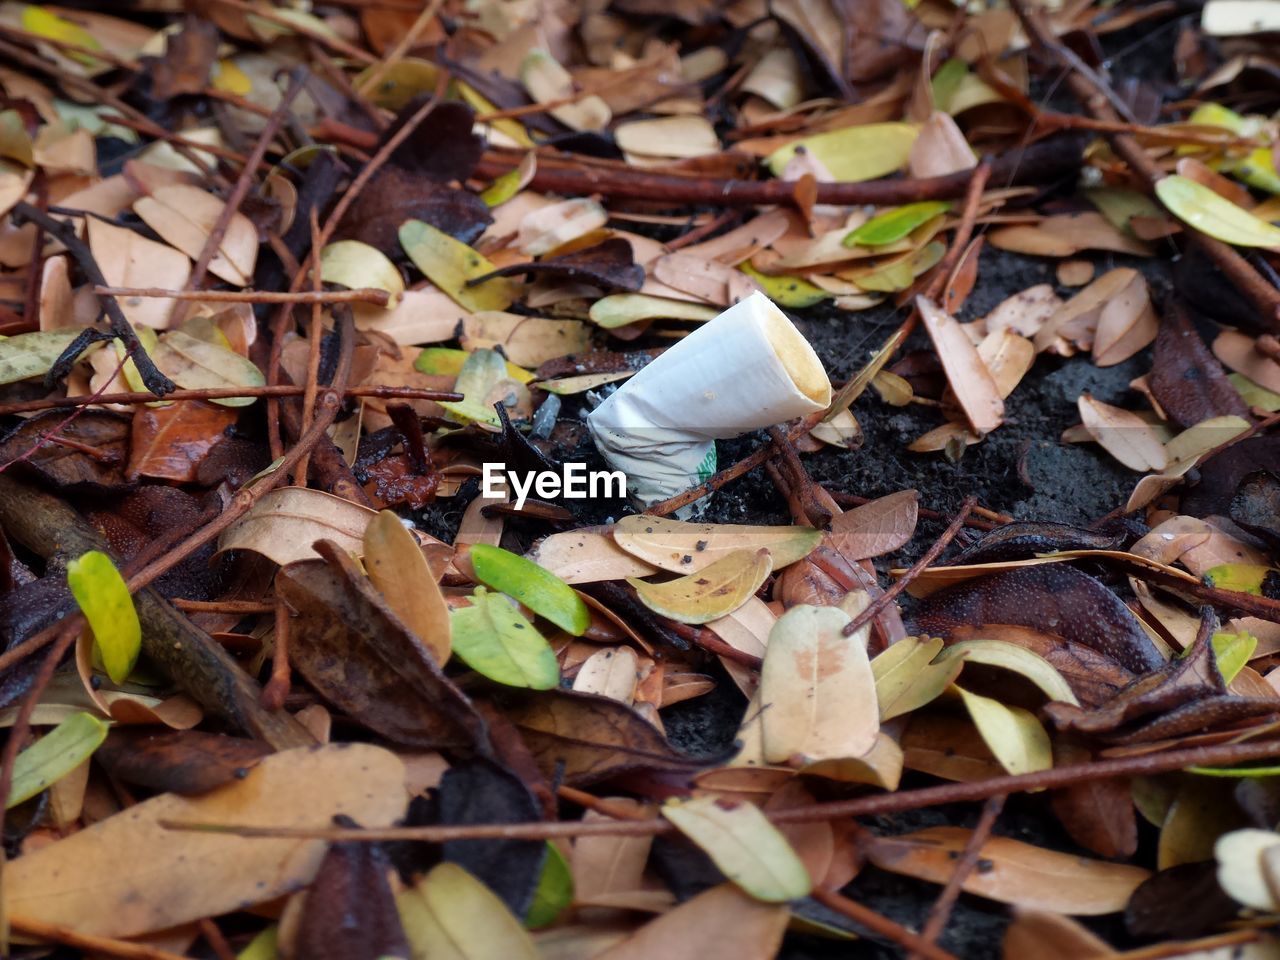 High angle view of cigarette butt amidst fallen dry leaves